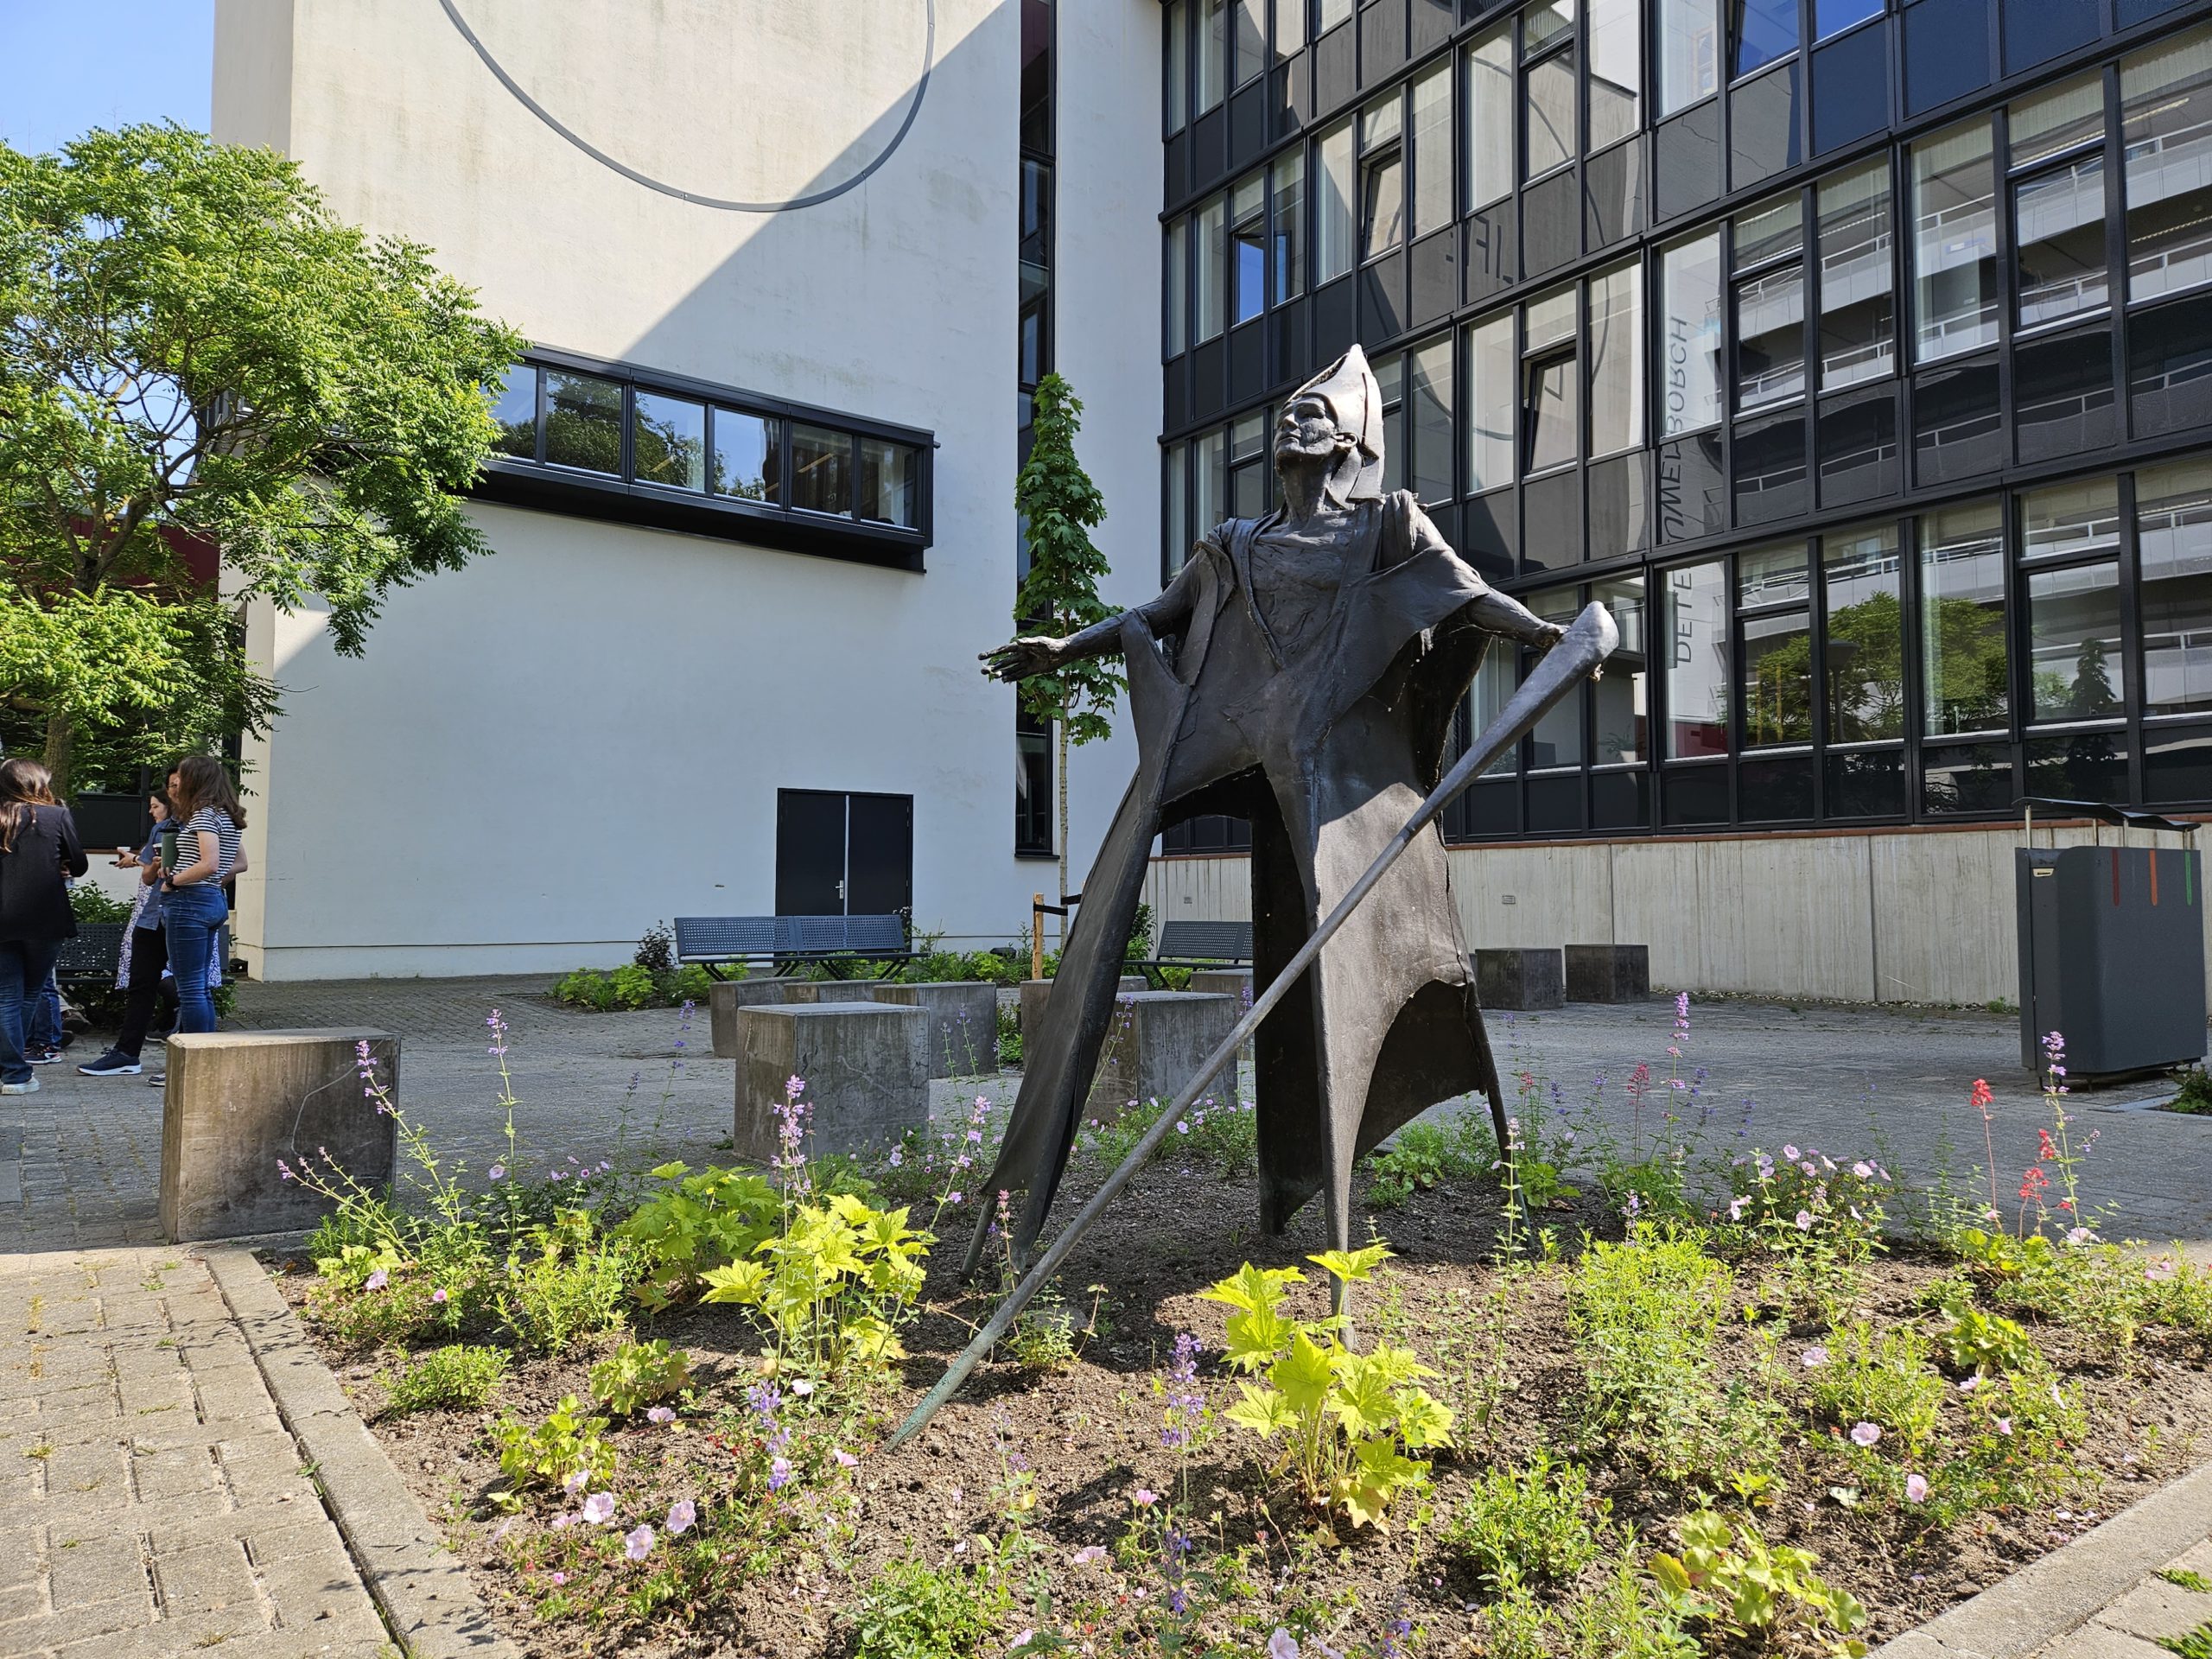 The Teacher of the Year receives a replica of the ‘teacher’ sculpture of which the original can be seen in front of the Leeuwenborch building. Photo Luuk Zegers